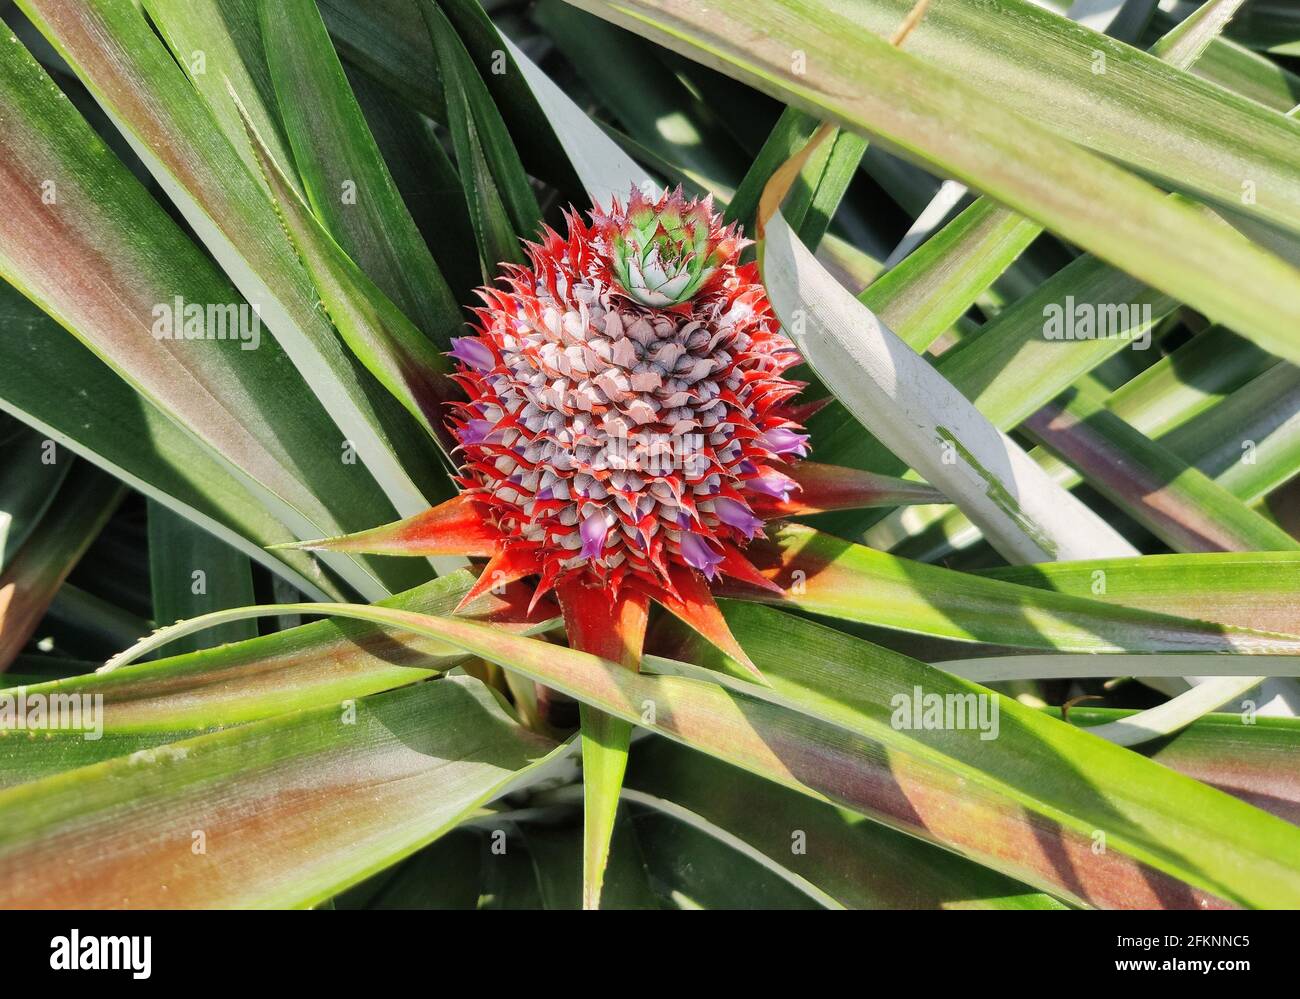 Pineapple sprout fruit growing in a plantation Stock Photo